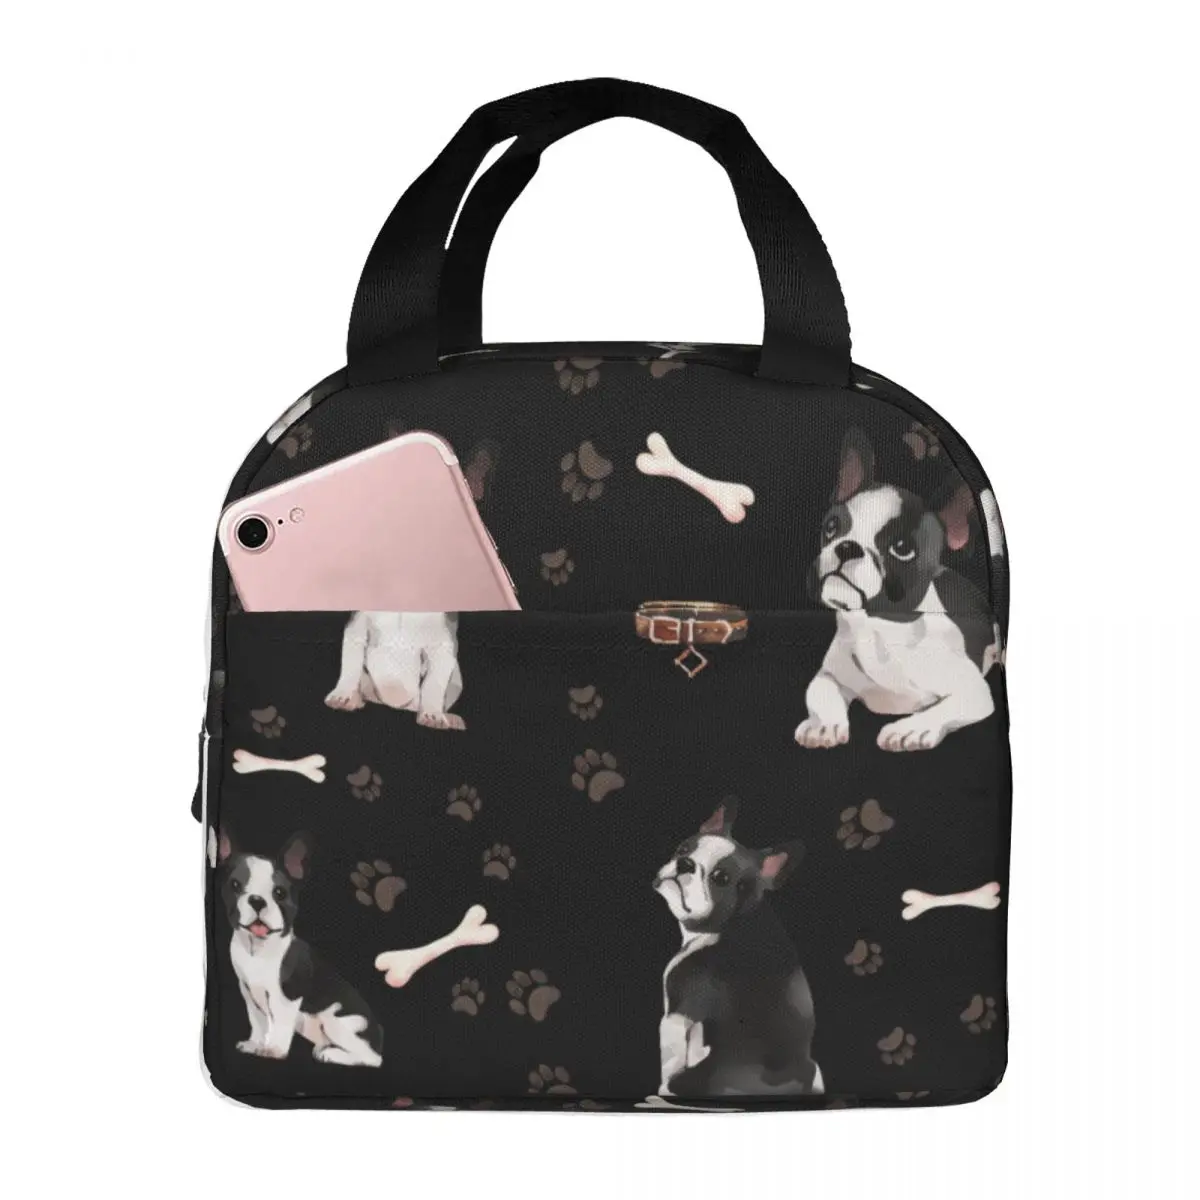 Cute Boston Terrier Dog Lunch Bag Portable Insulated Canvas Cooler Thermal Picnic Tote for Women Children